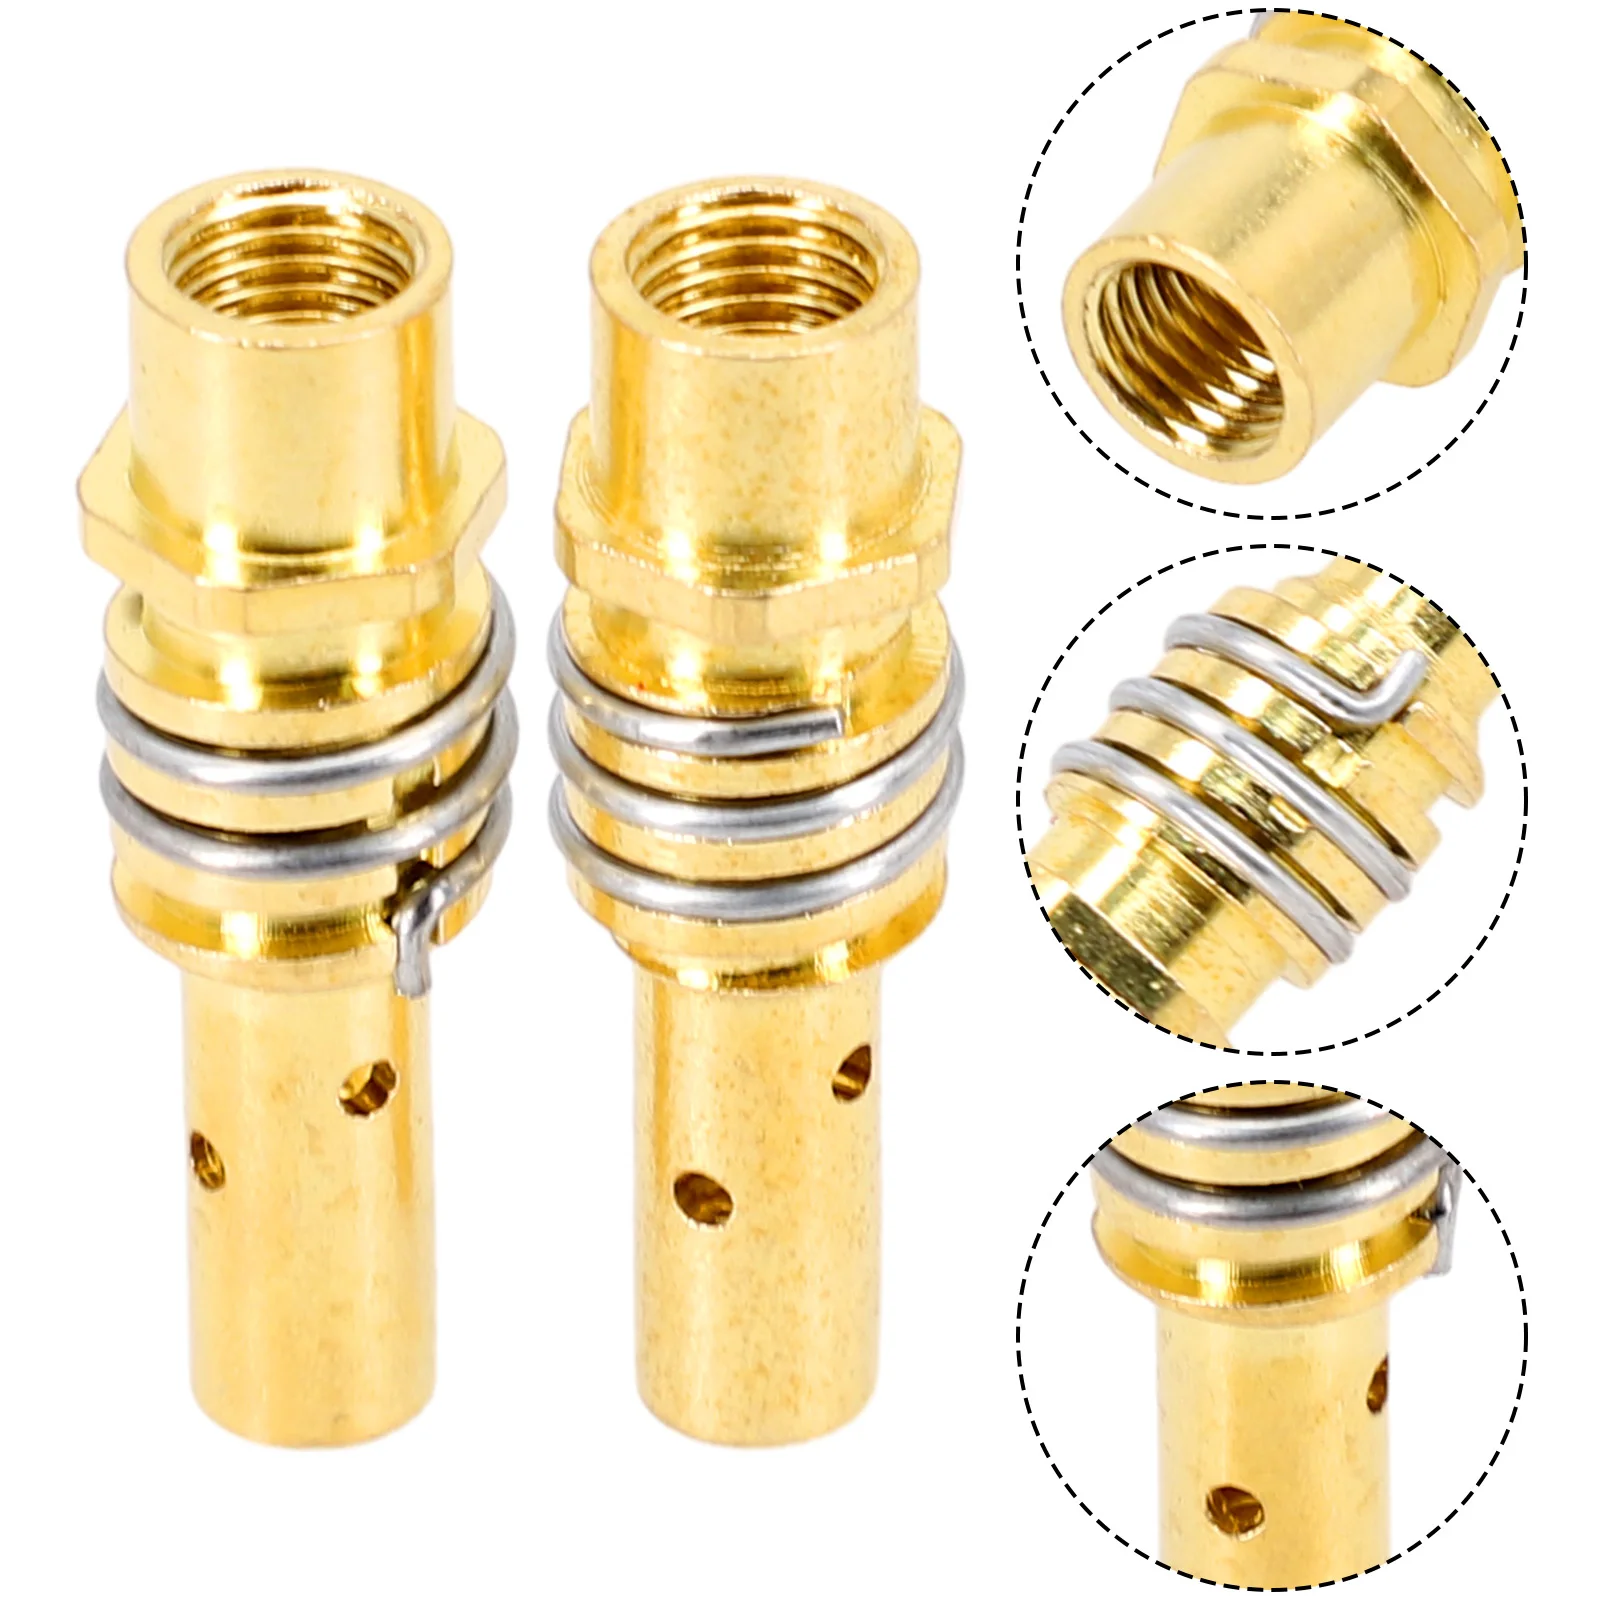 

2pcs 15AK Gas Nozzle Holder With Nozzle Spring For MIG/MAG Welding Torch Contact Tip Holder Welding Nozzles Soldering Tool